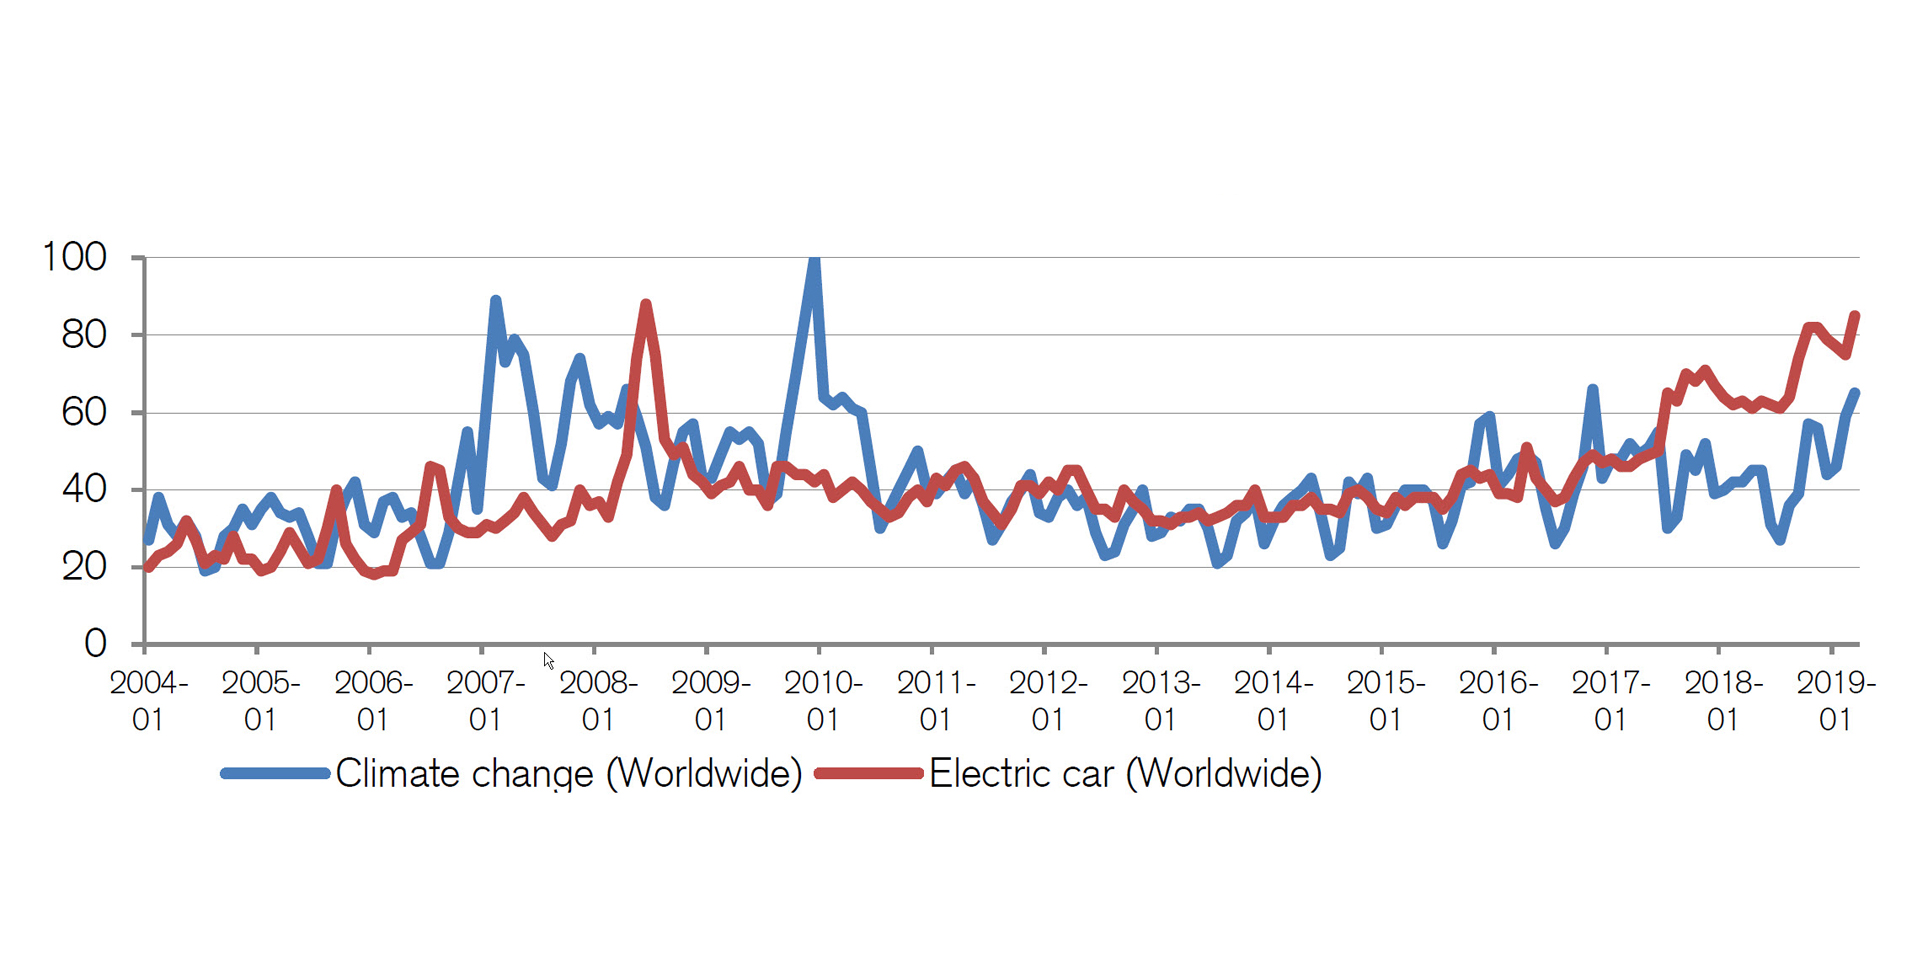 Google Trends Popularity Score of EVs and Climate Change